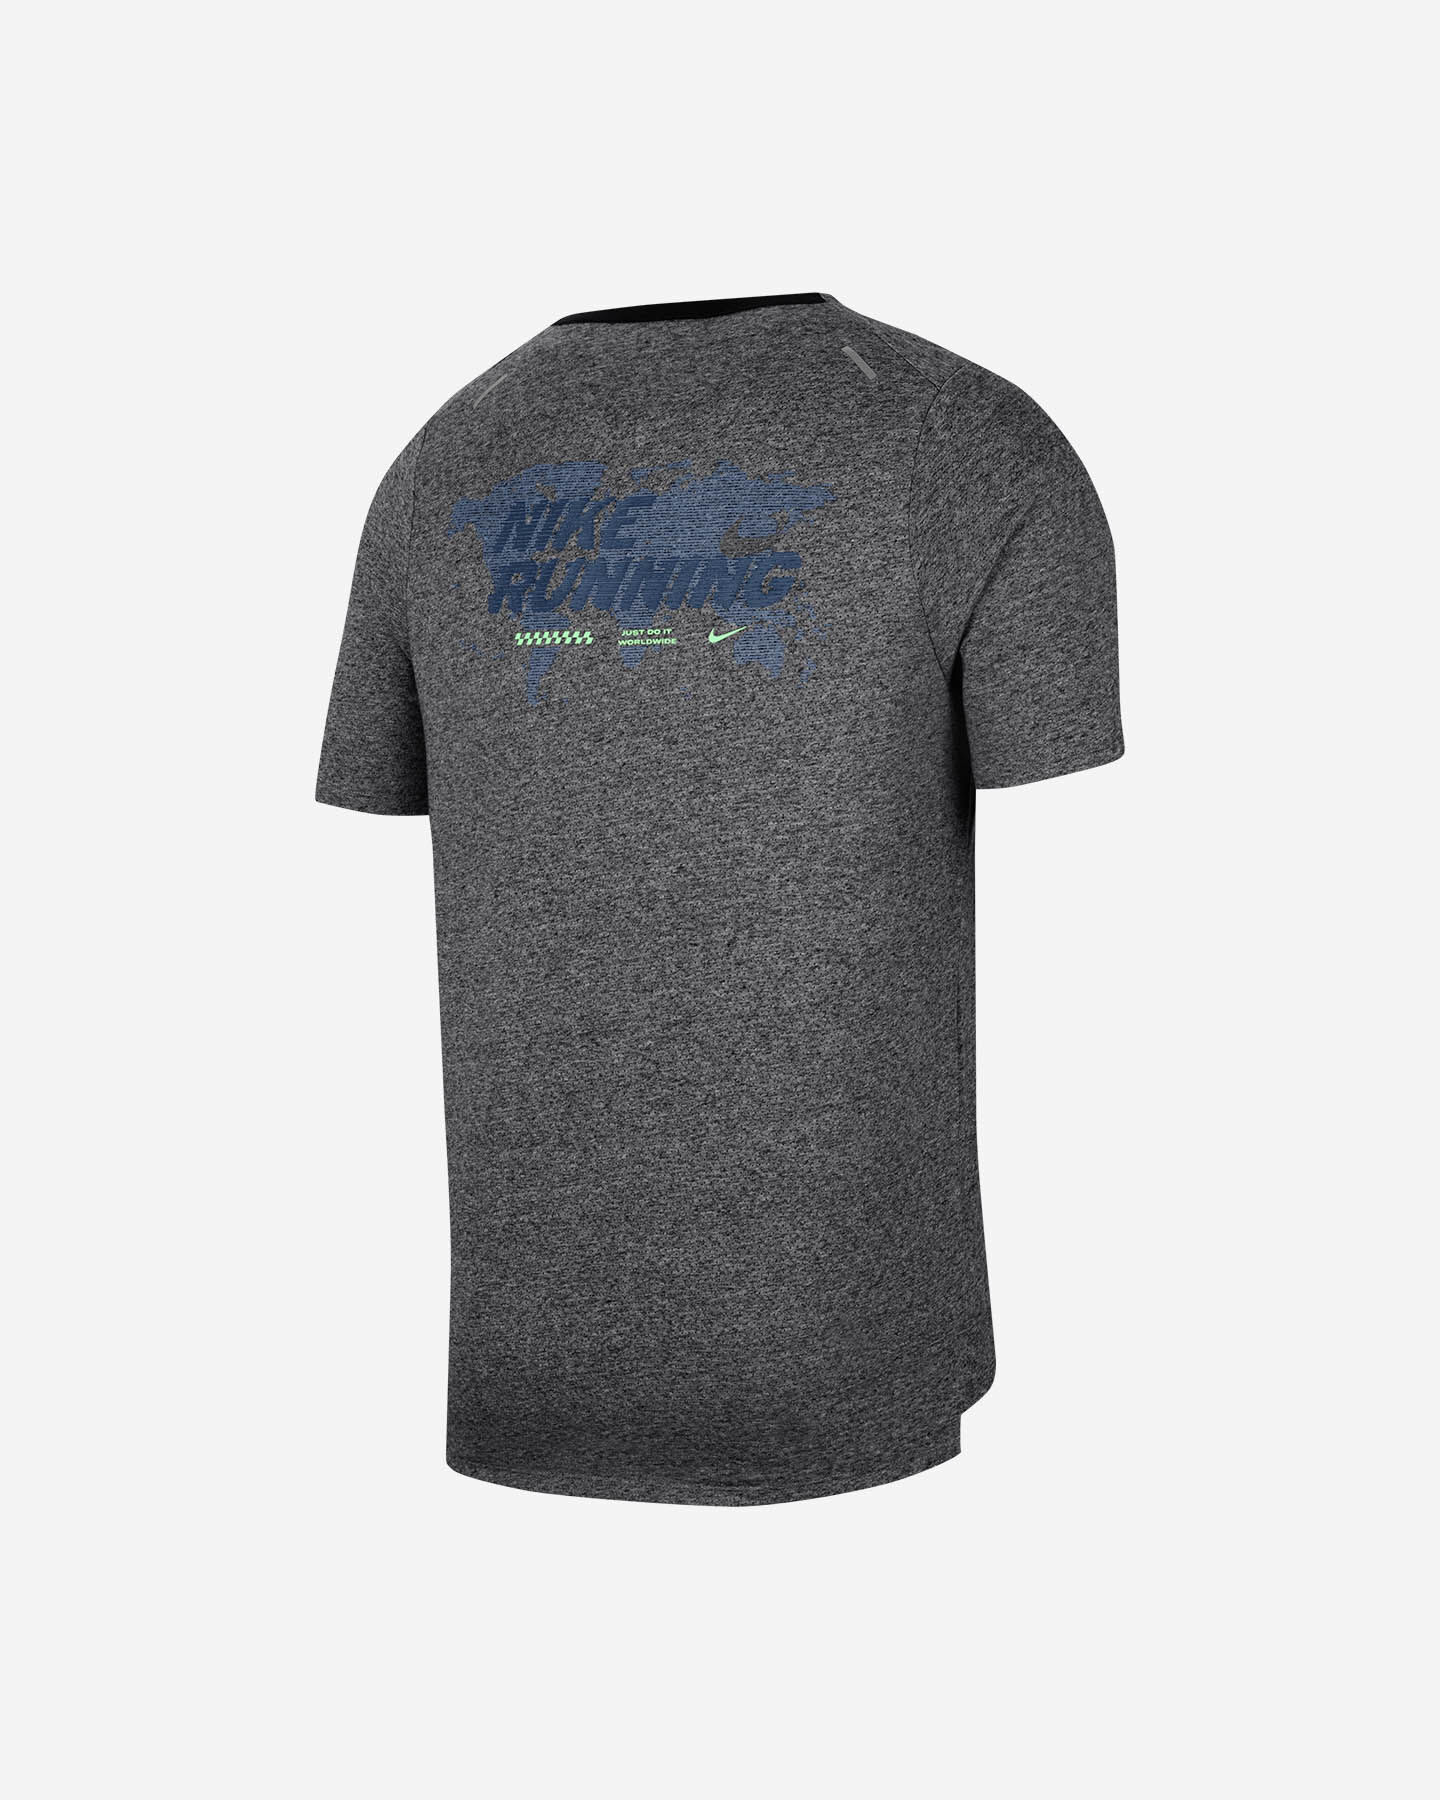  T-Shirt running NIKE RISE 365 FUTURE FAST M S5225510|063|S scatto 1